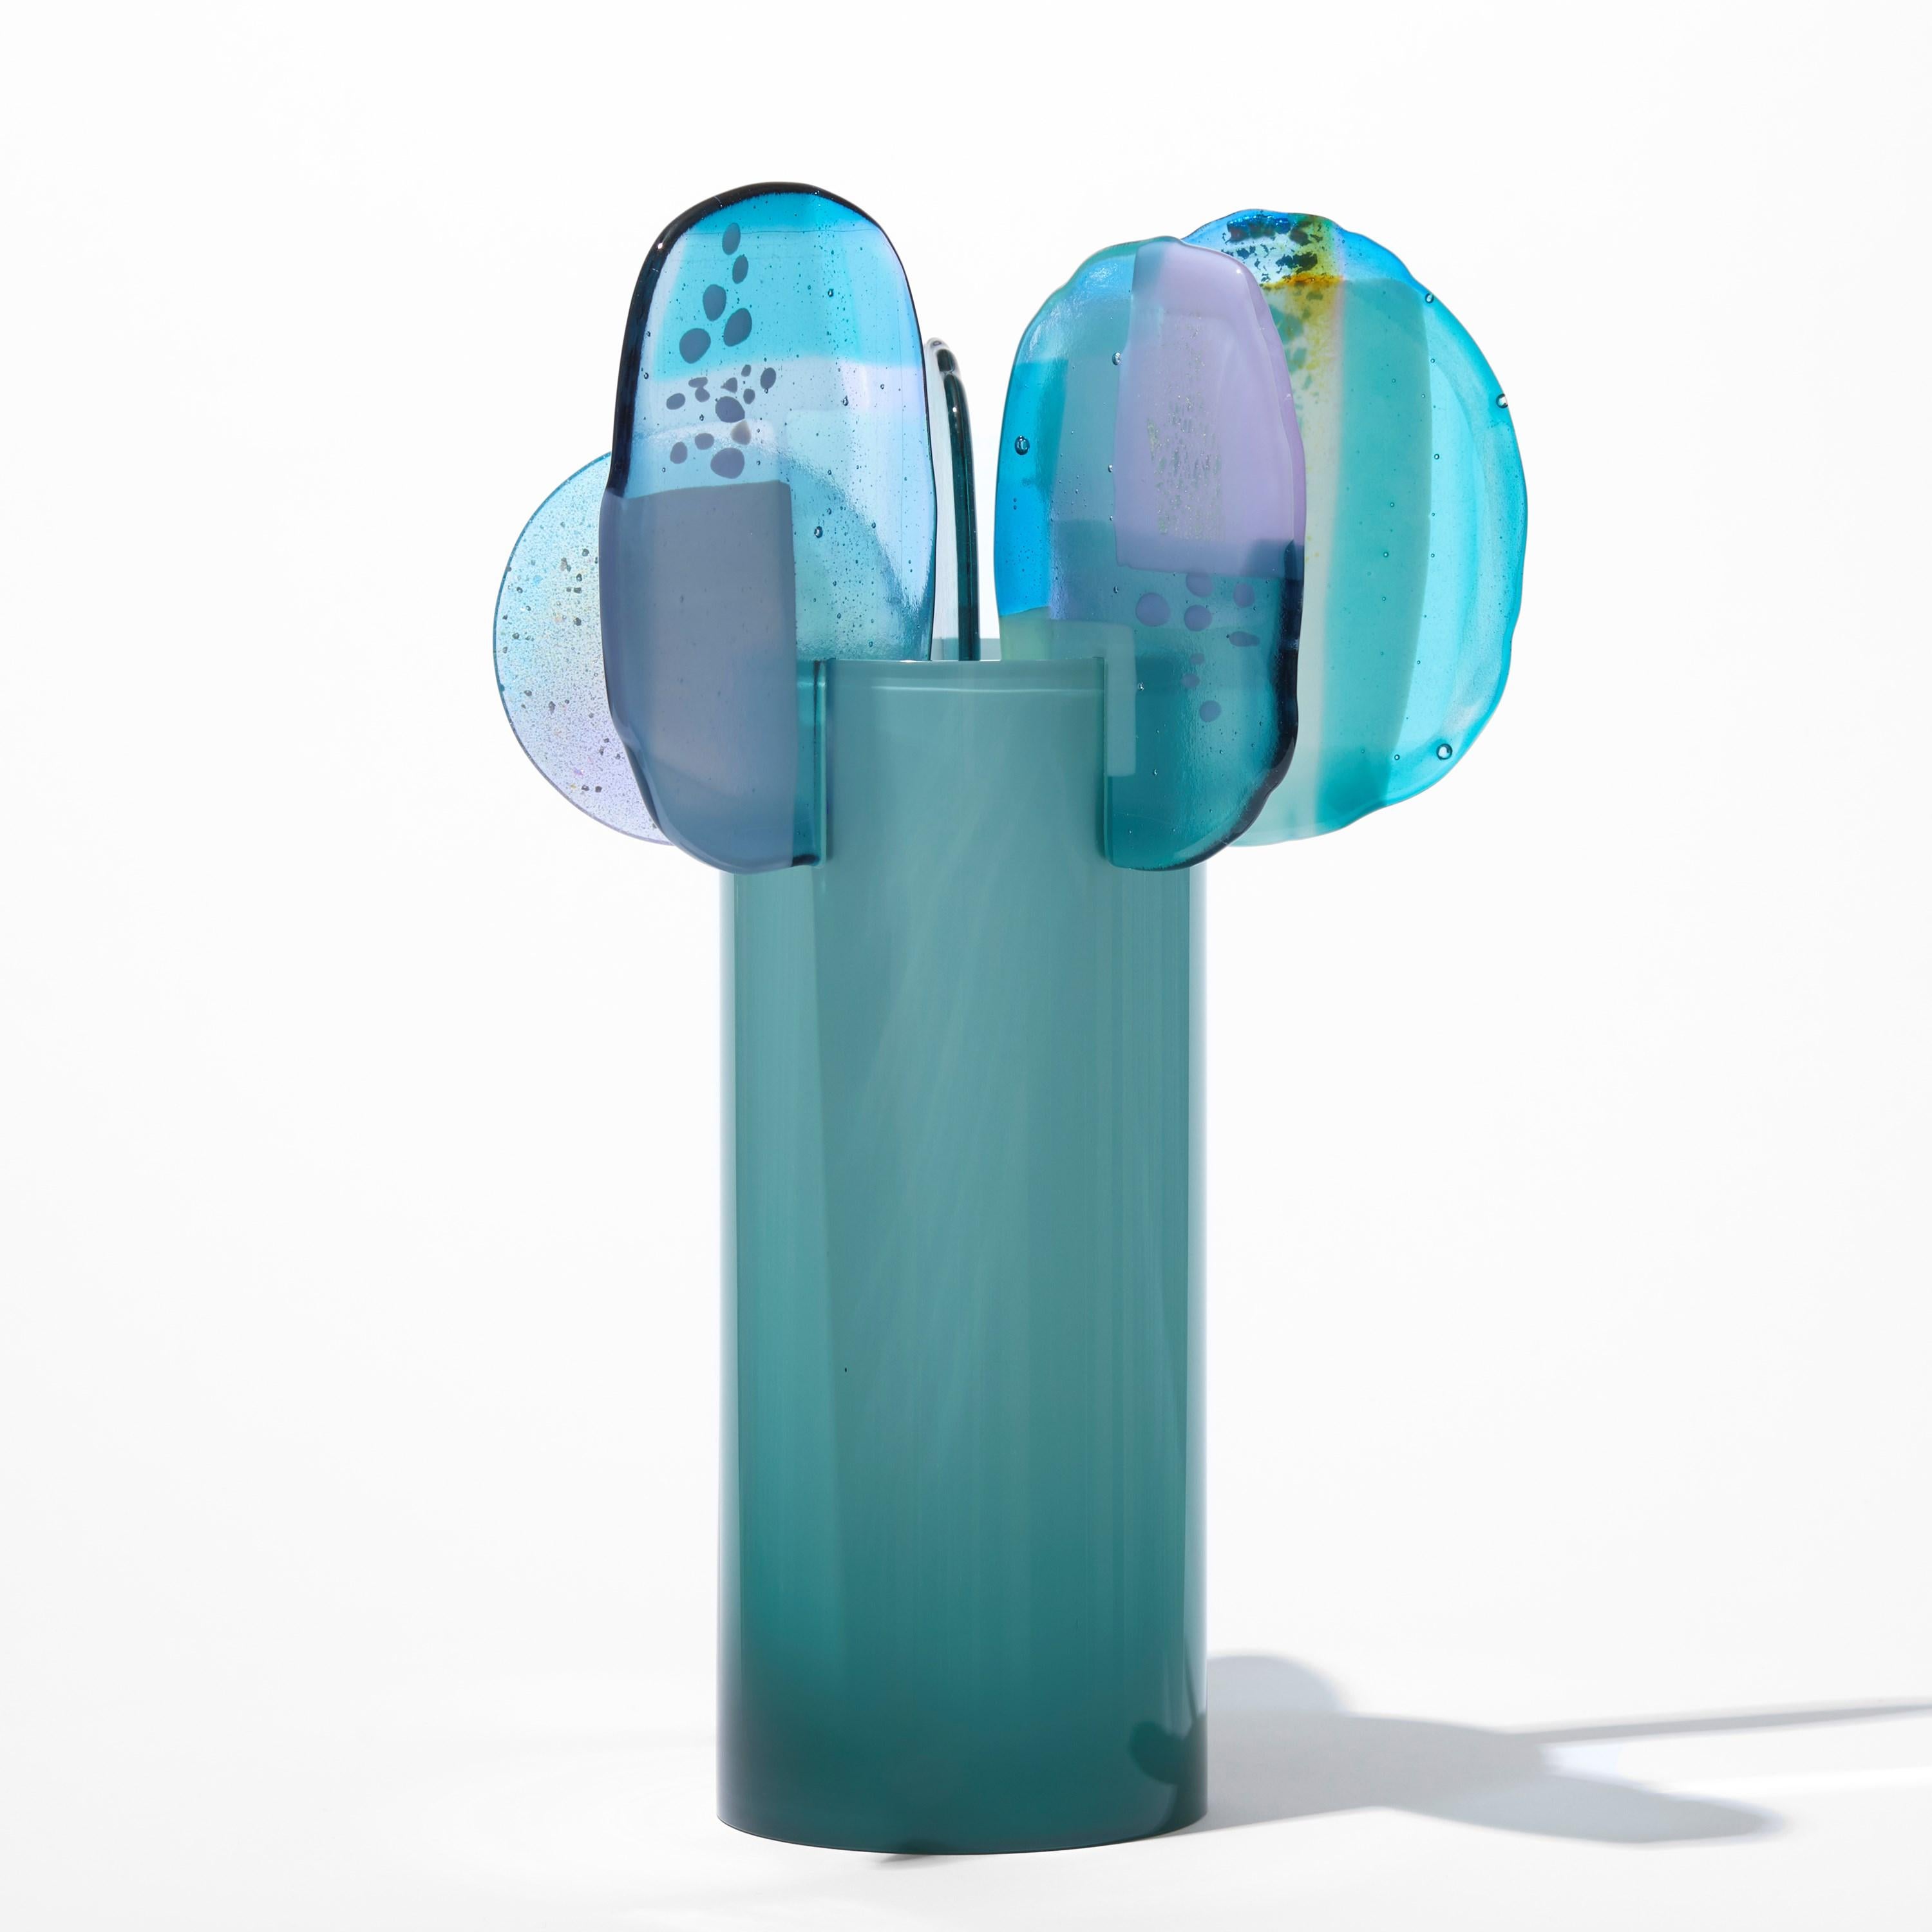 Organic Modern Paradise 08 in Jadeite, jade, aqua, blue & lilac glass sculpture by Amy Cushing For Sale